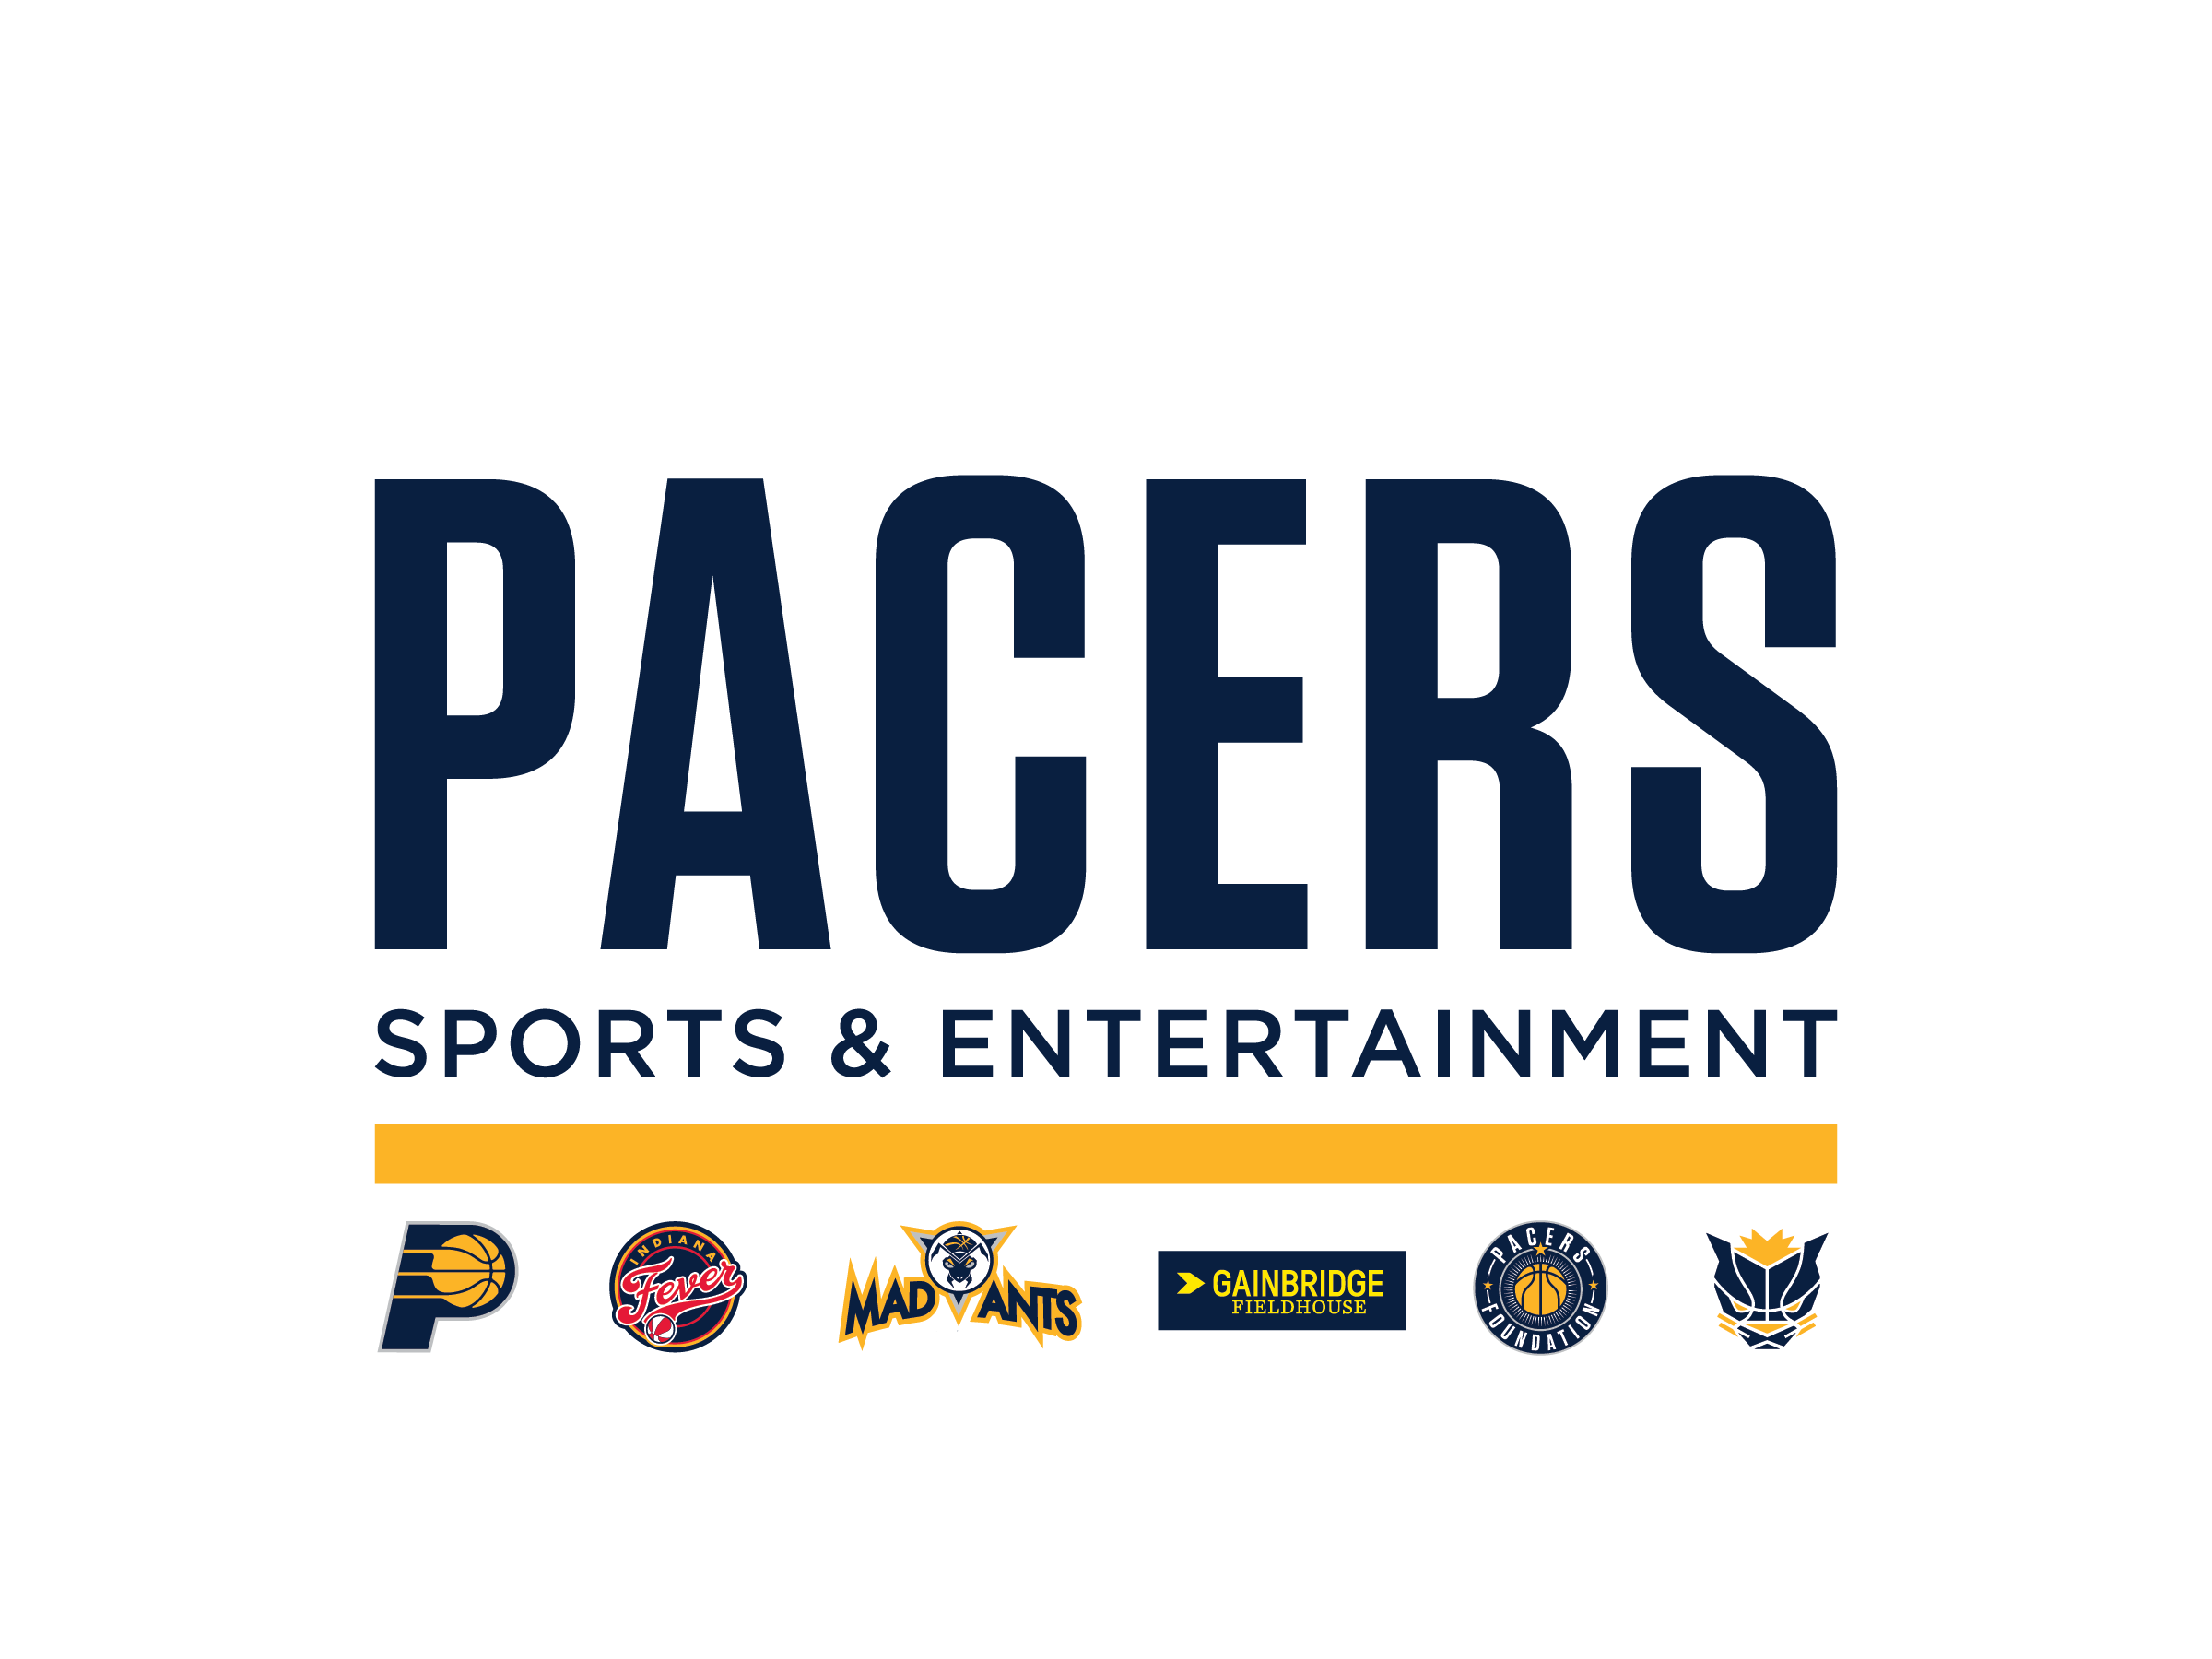 Pacers Sports & Entertainment